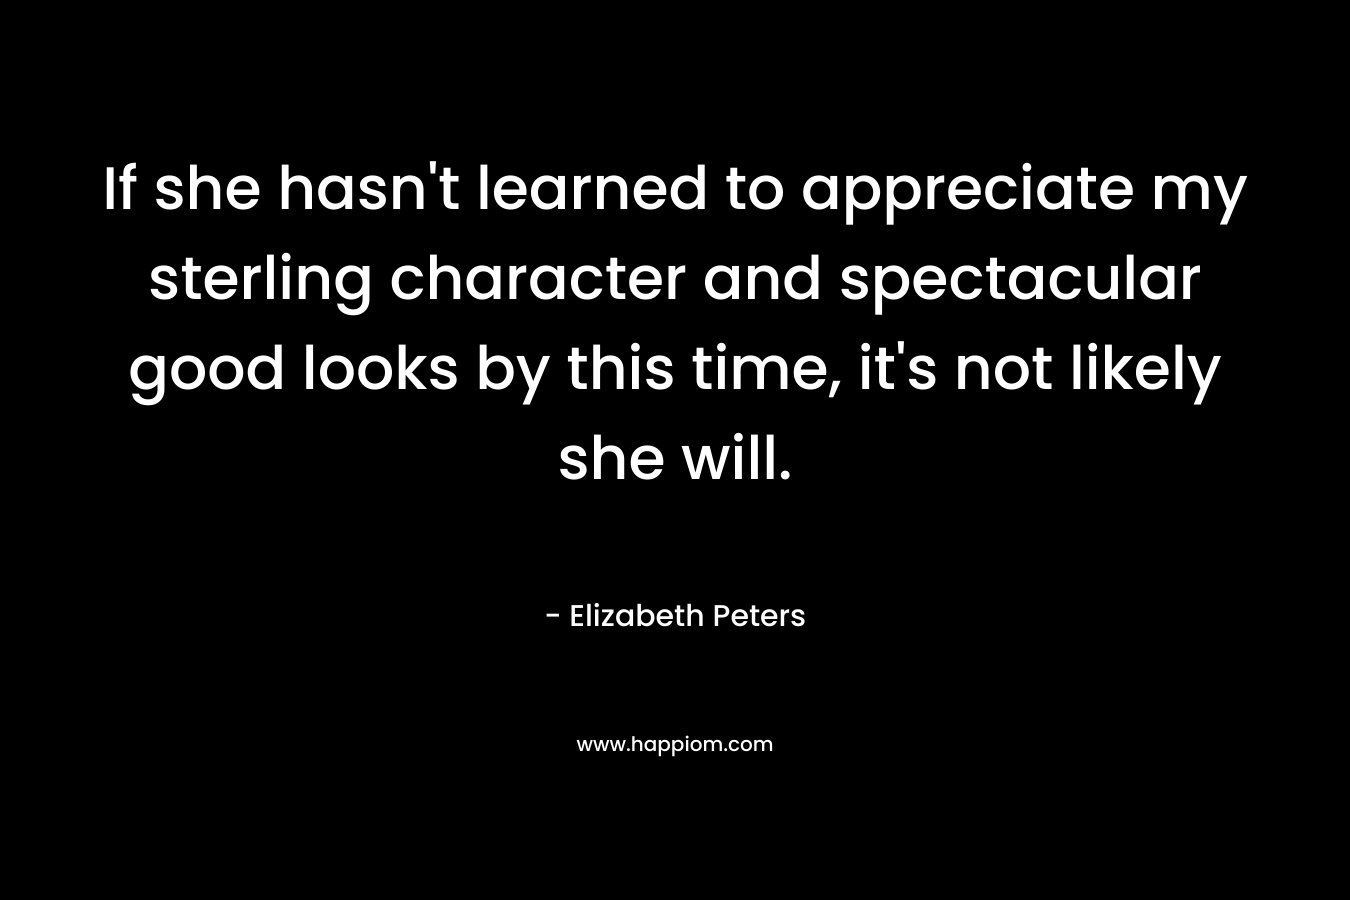 If she hasn’t learned to appreciate my sterling character and spectacular good looks by this time, it’s not likely she will. – Elizabeth Peters